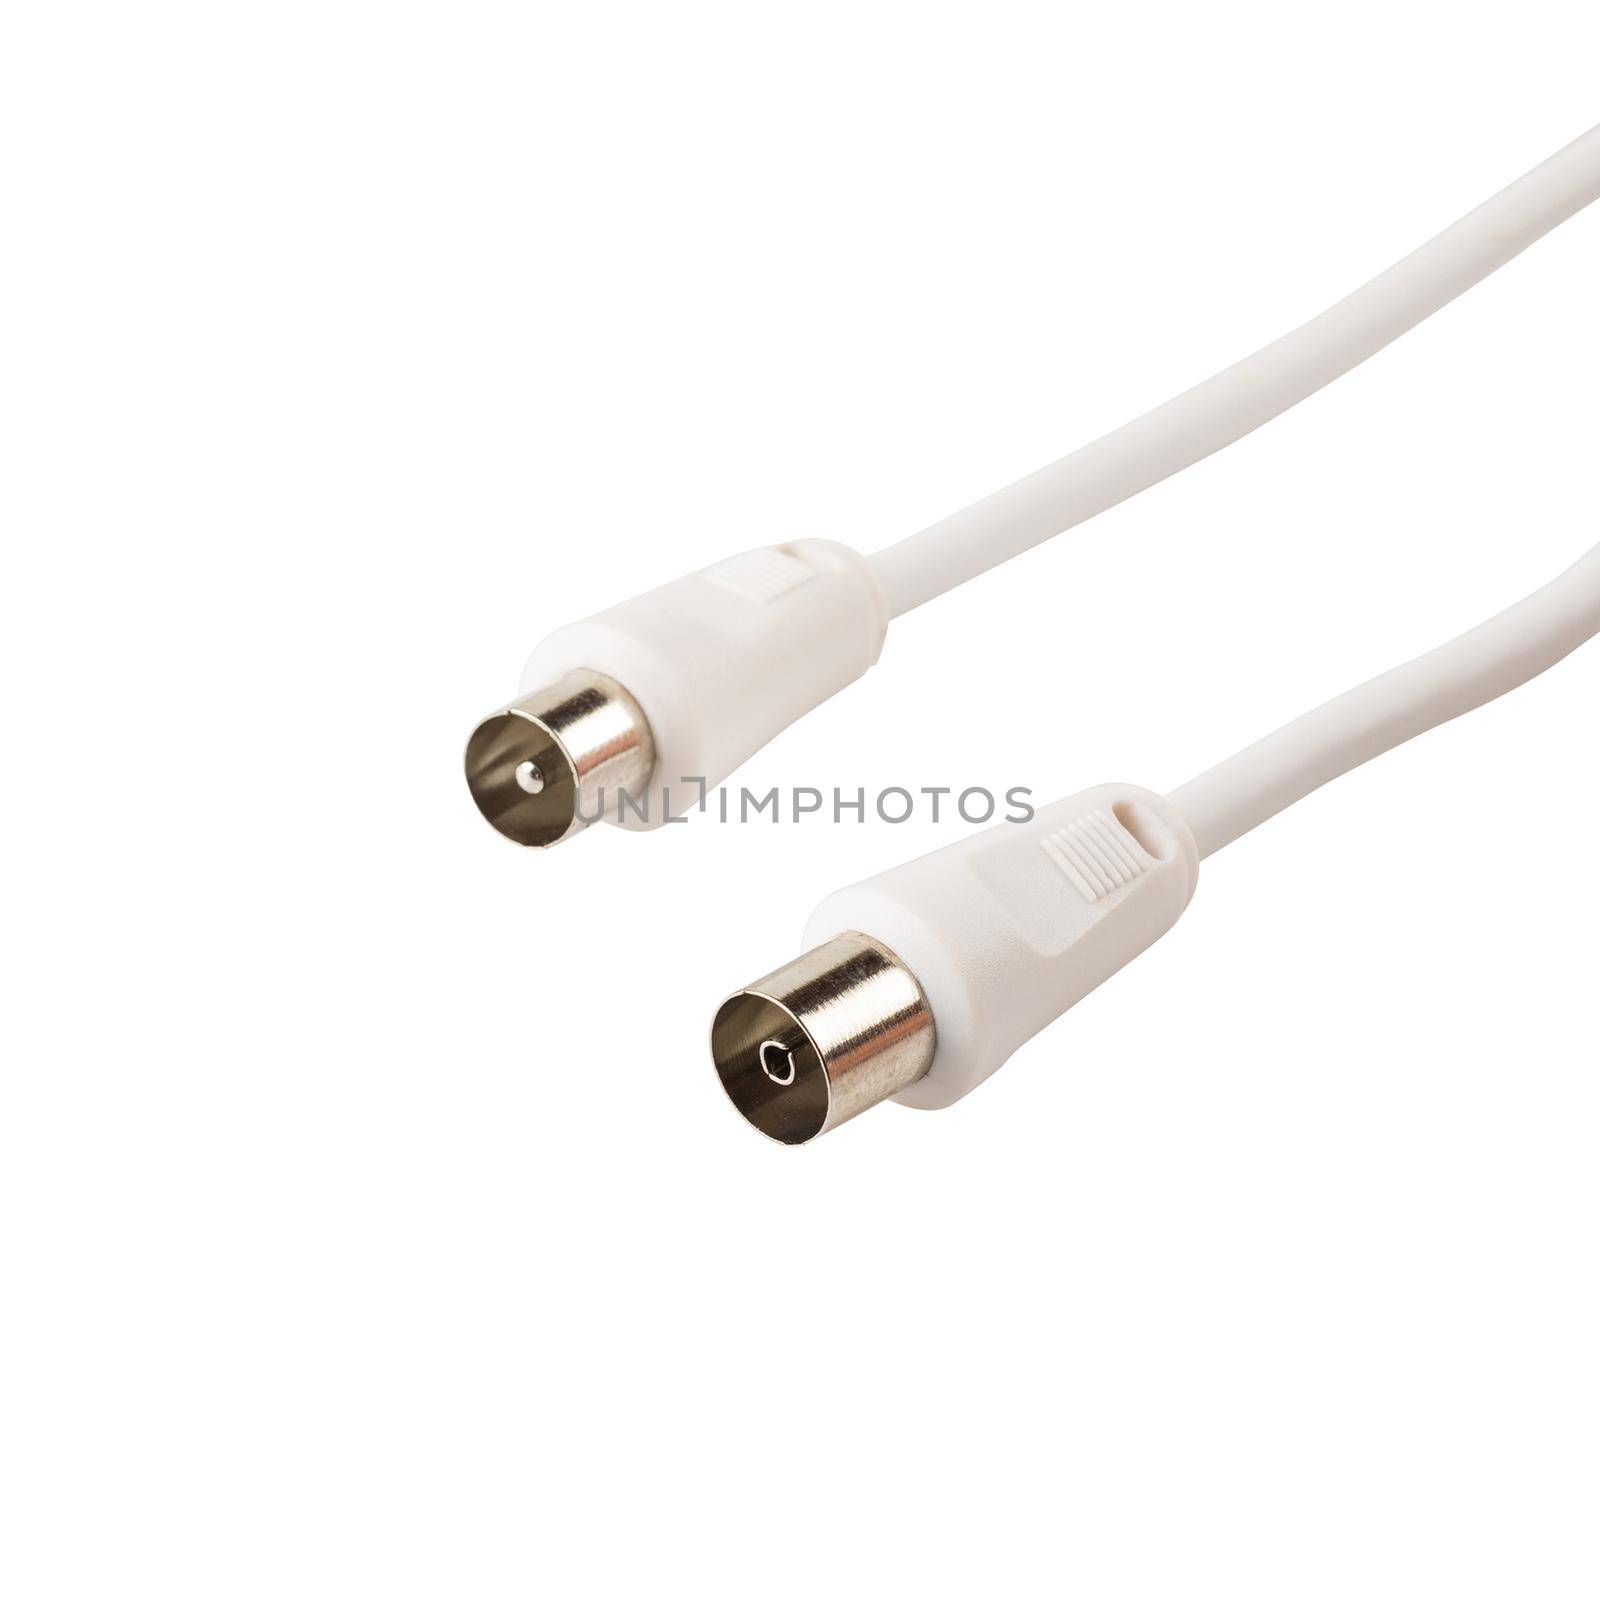 TV antenna cable isolated close up shot over white